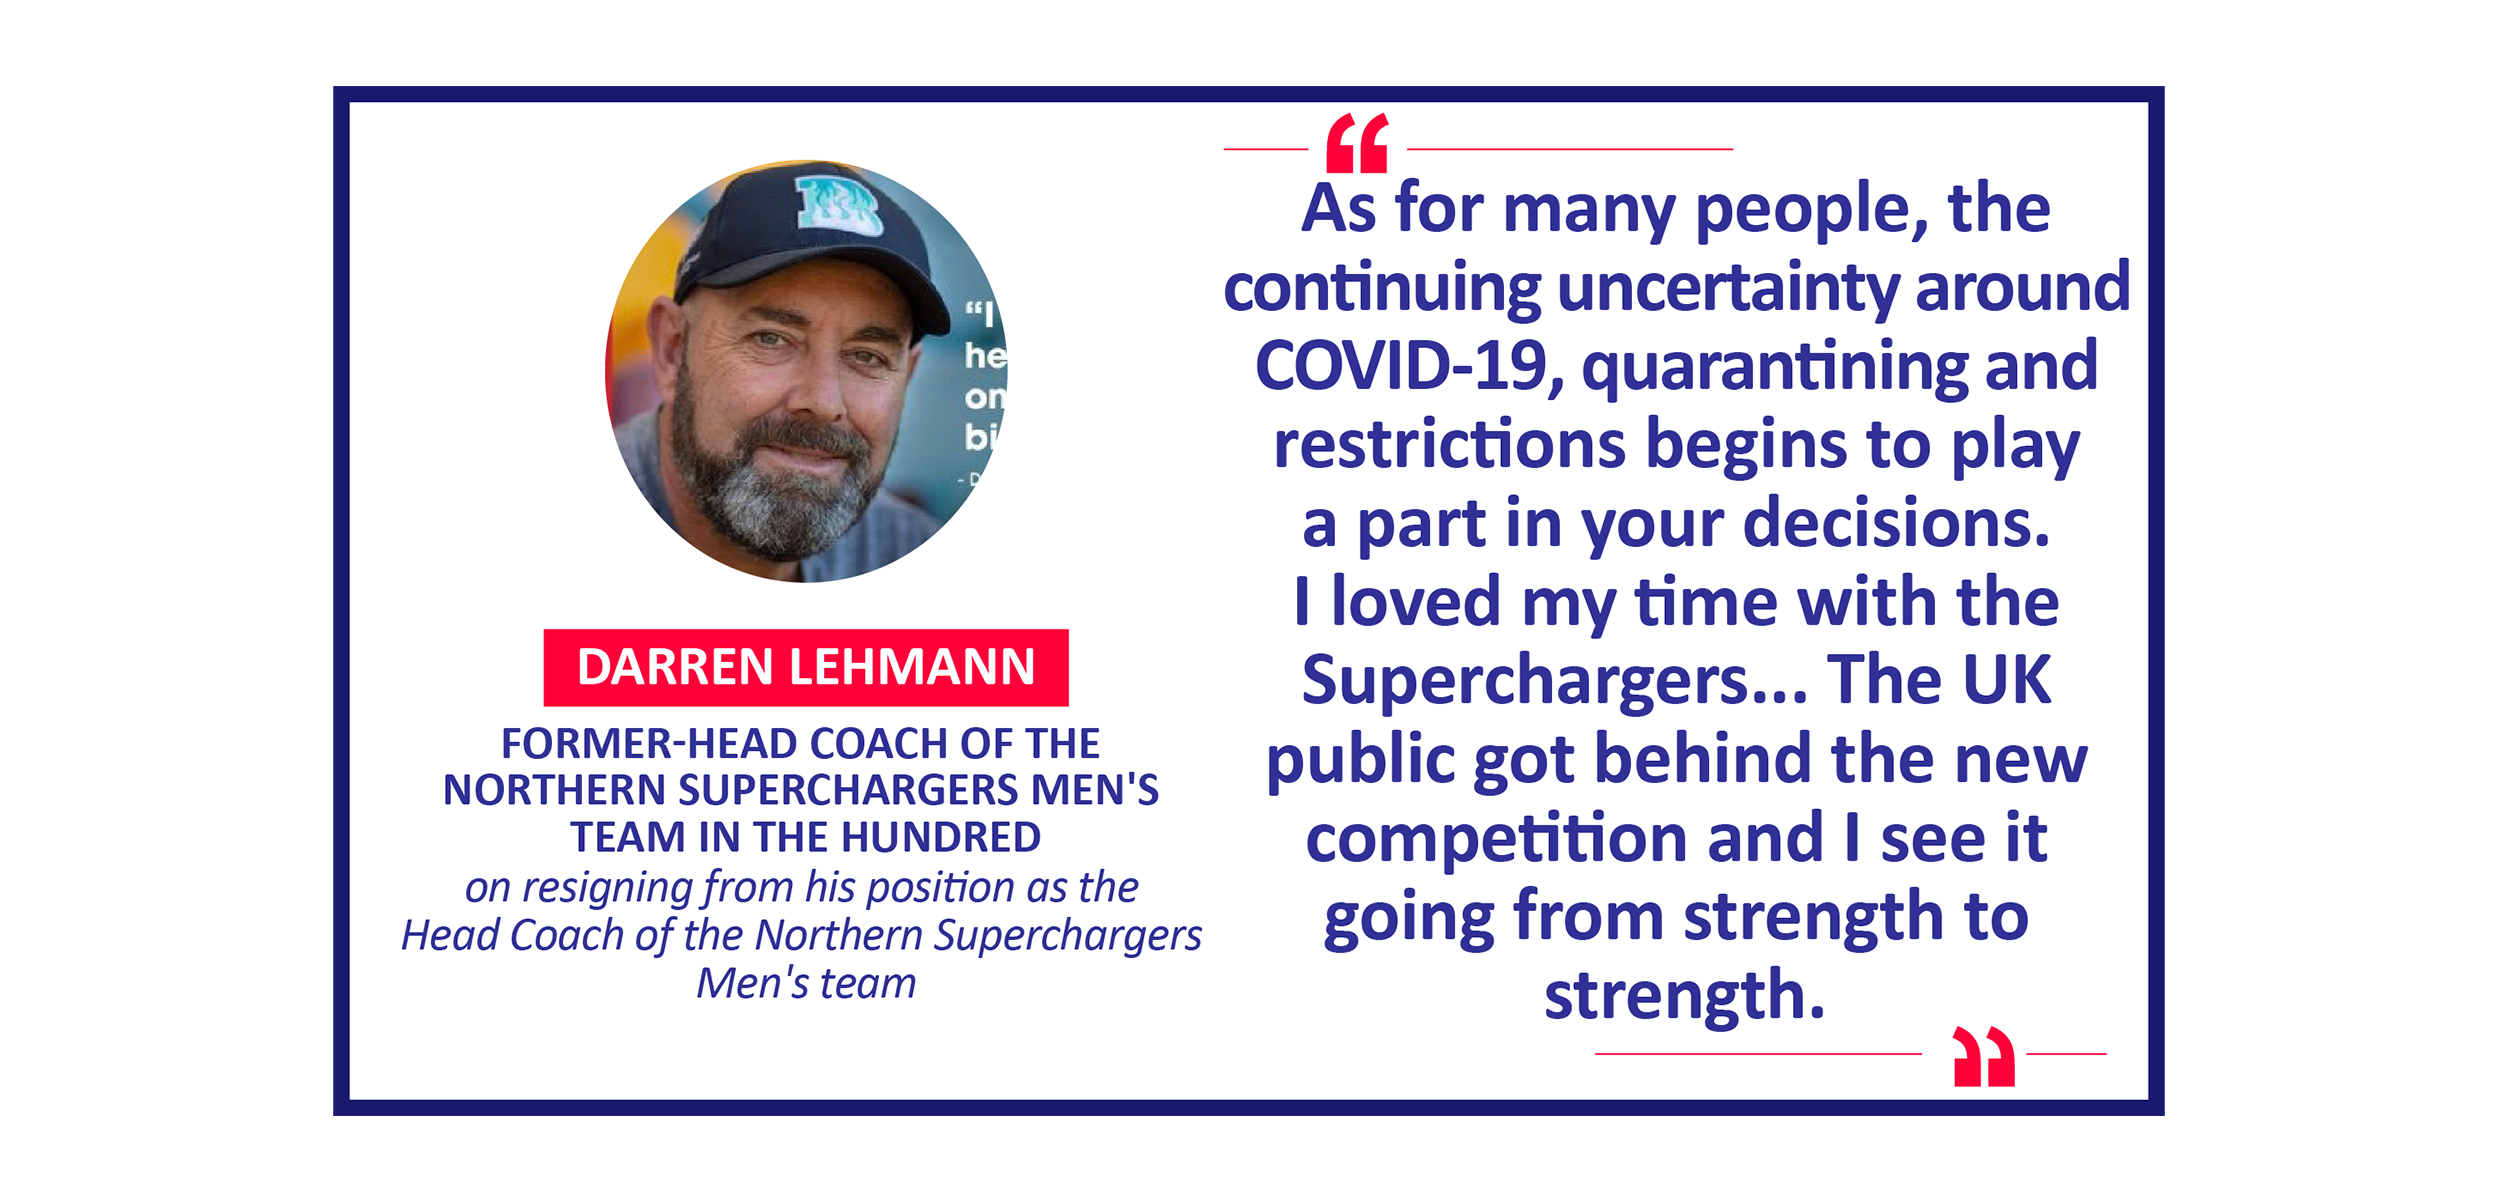 Darren Lehmann, Former-Head Coach of the Northern Superchargers Men's team in The Hundred on resigning from his position as the Head Coach of the Northern Superchargers Men's team